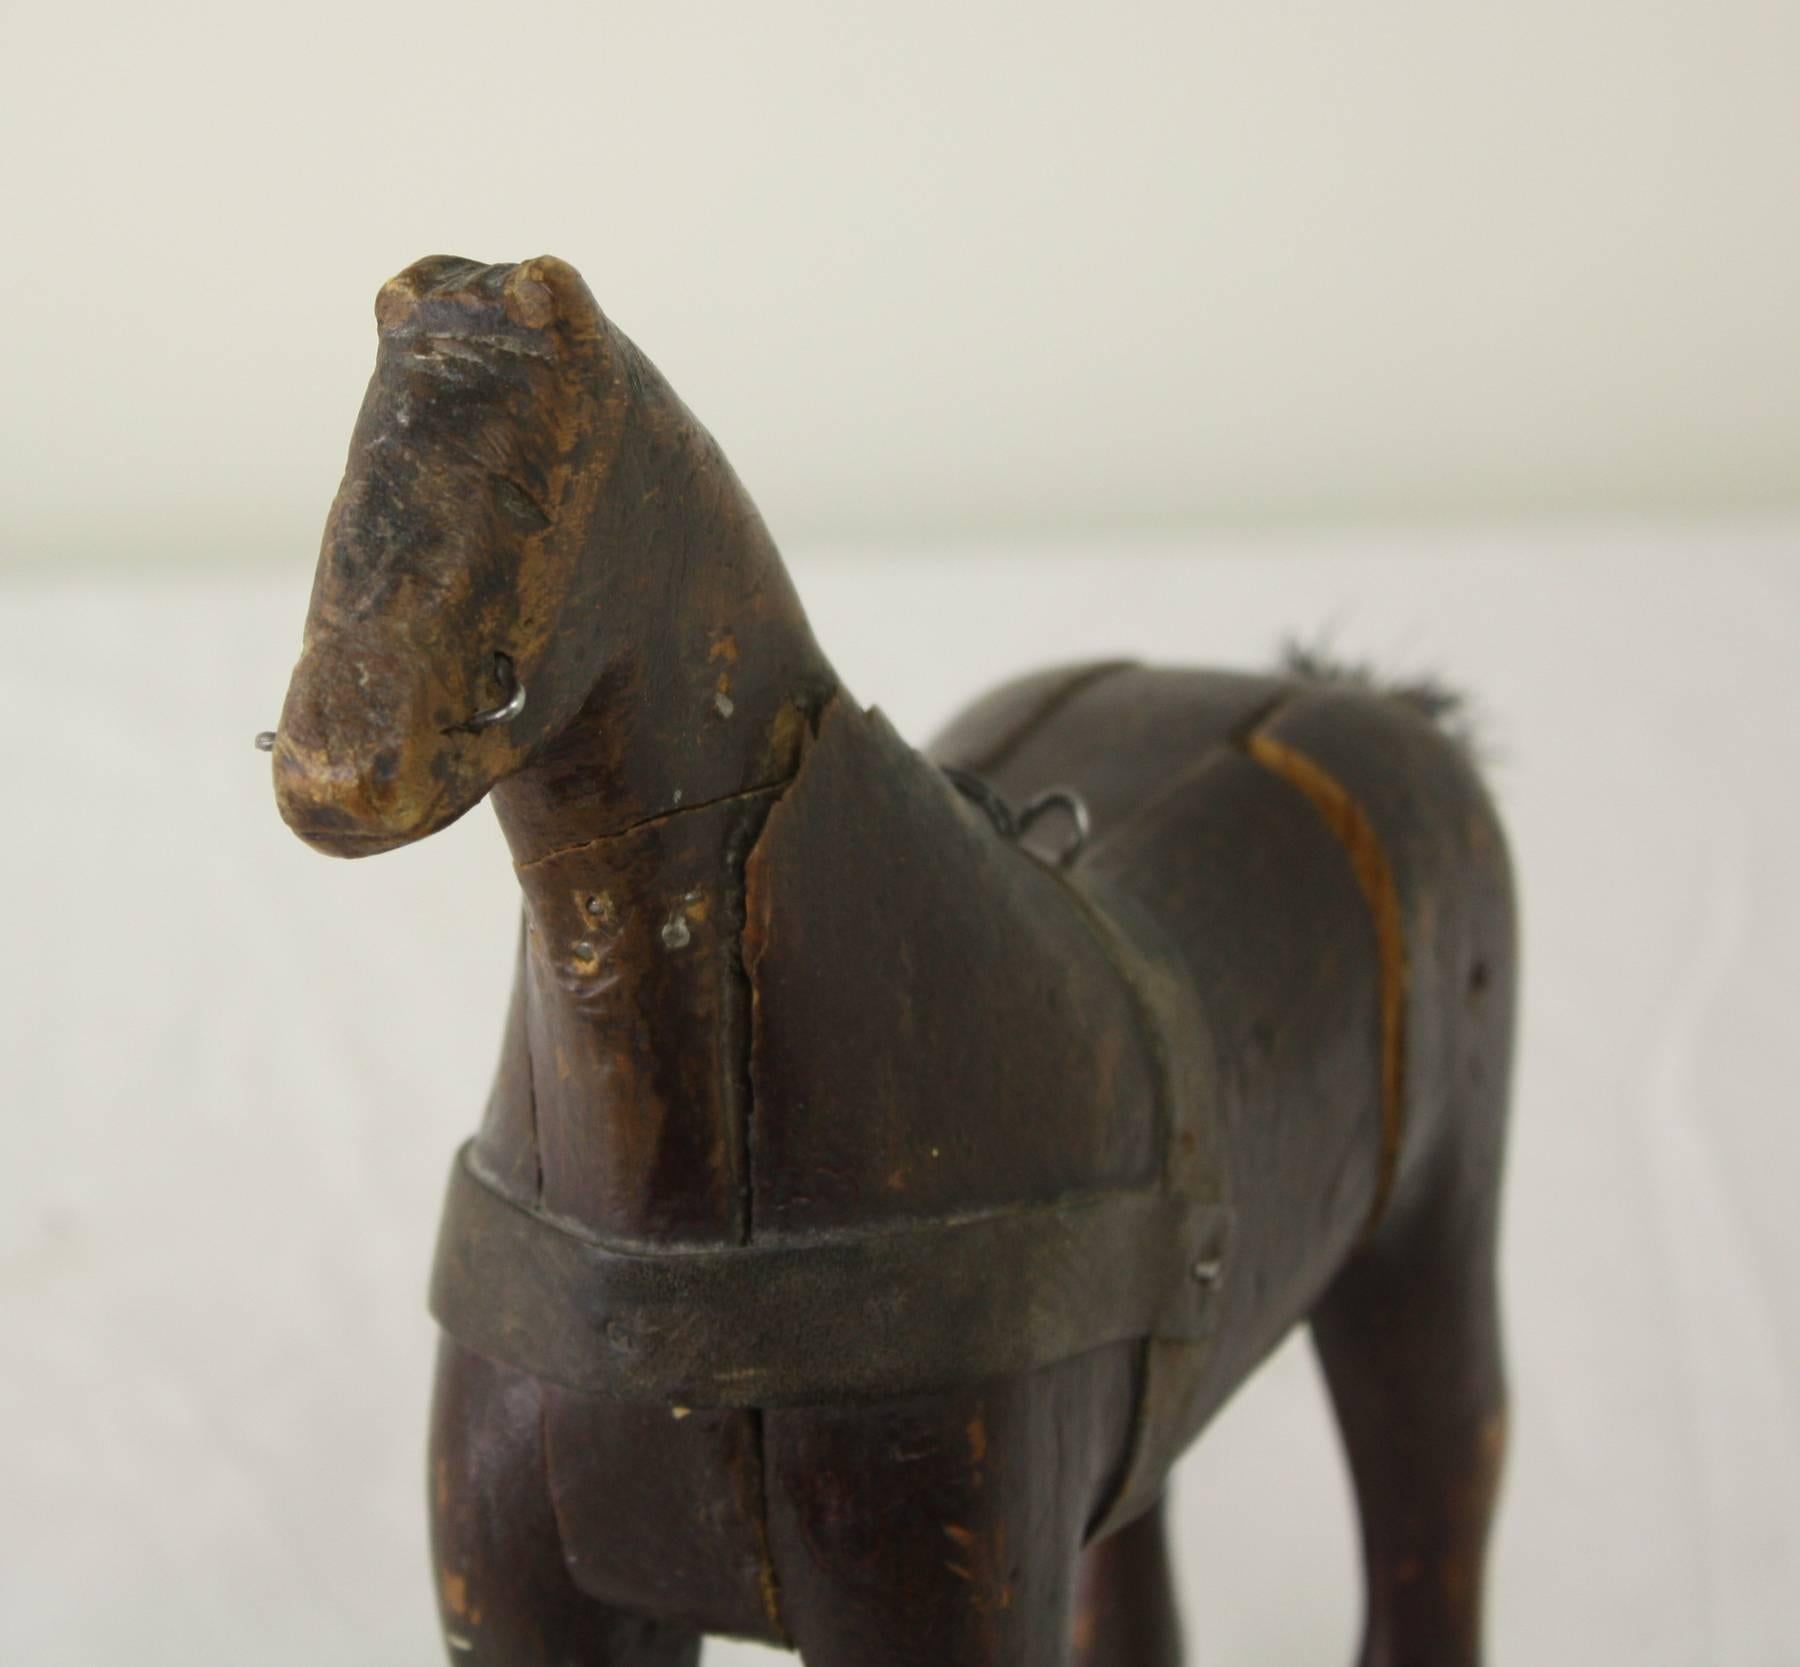 This is a nice chunky horse, with parts of a harness, reins and bit.  And a charming short tail (probably fairly new).  In original paint, this is a smaller horse, which has the look of a primitive, home-carved piece.  A delightful shelf display